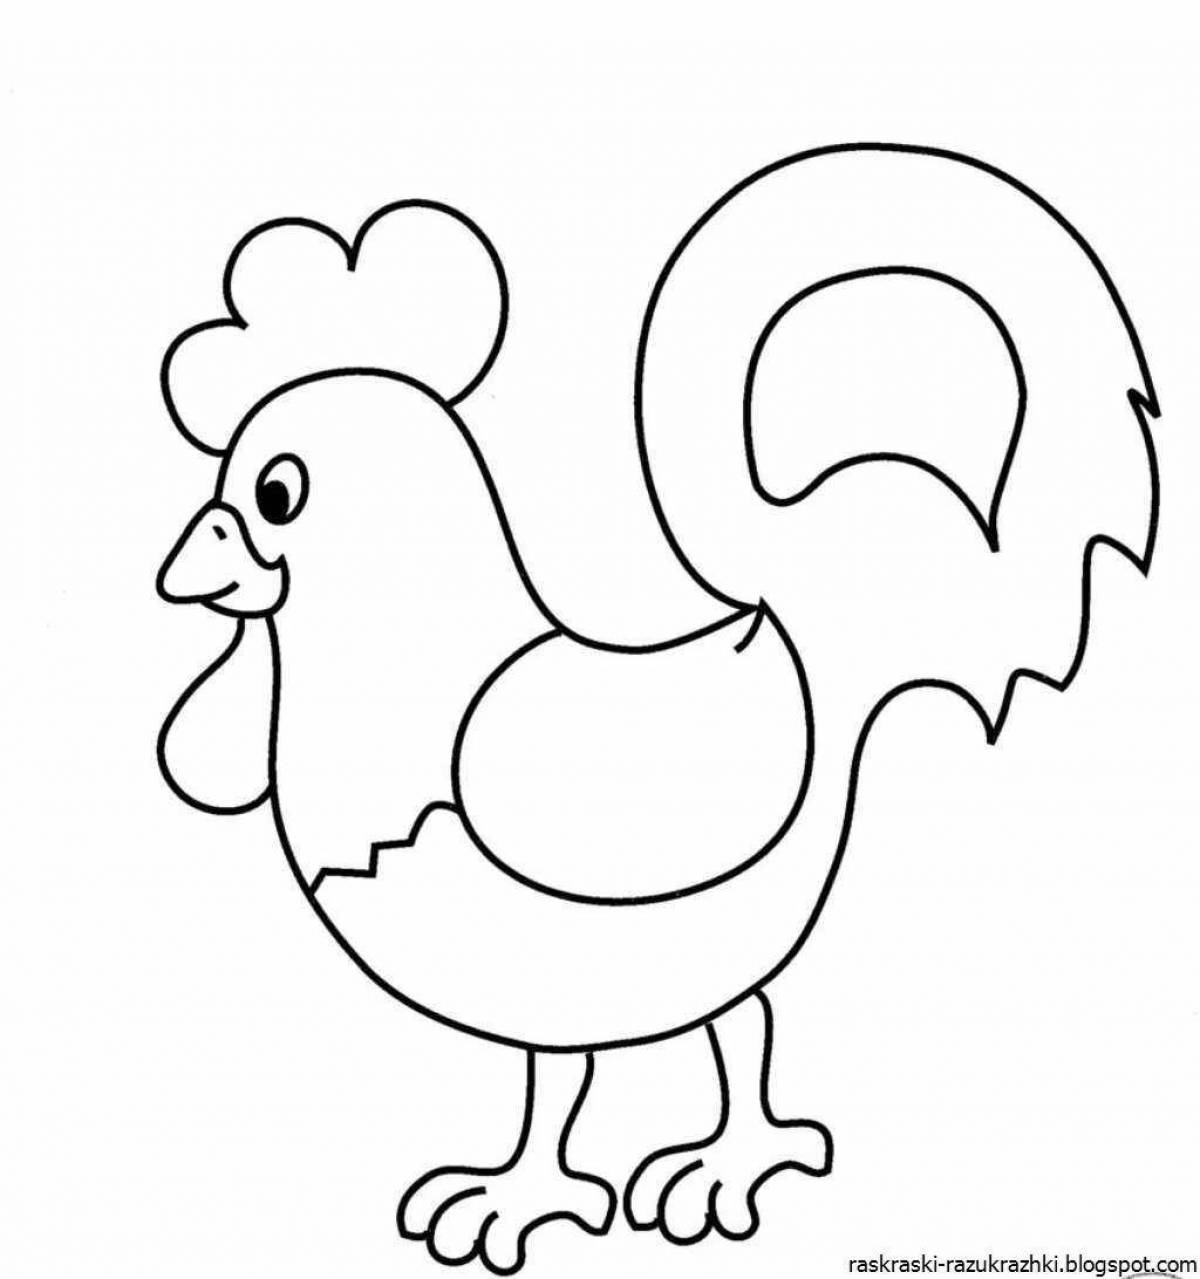 Great cockerel coloring book for kids